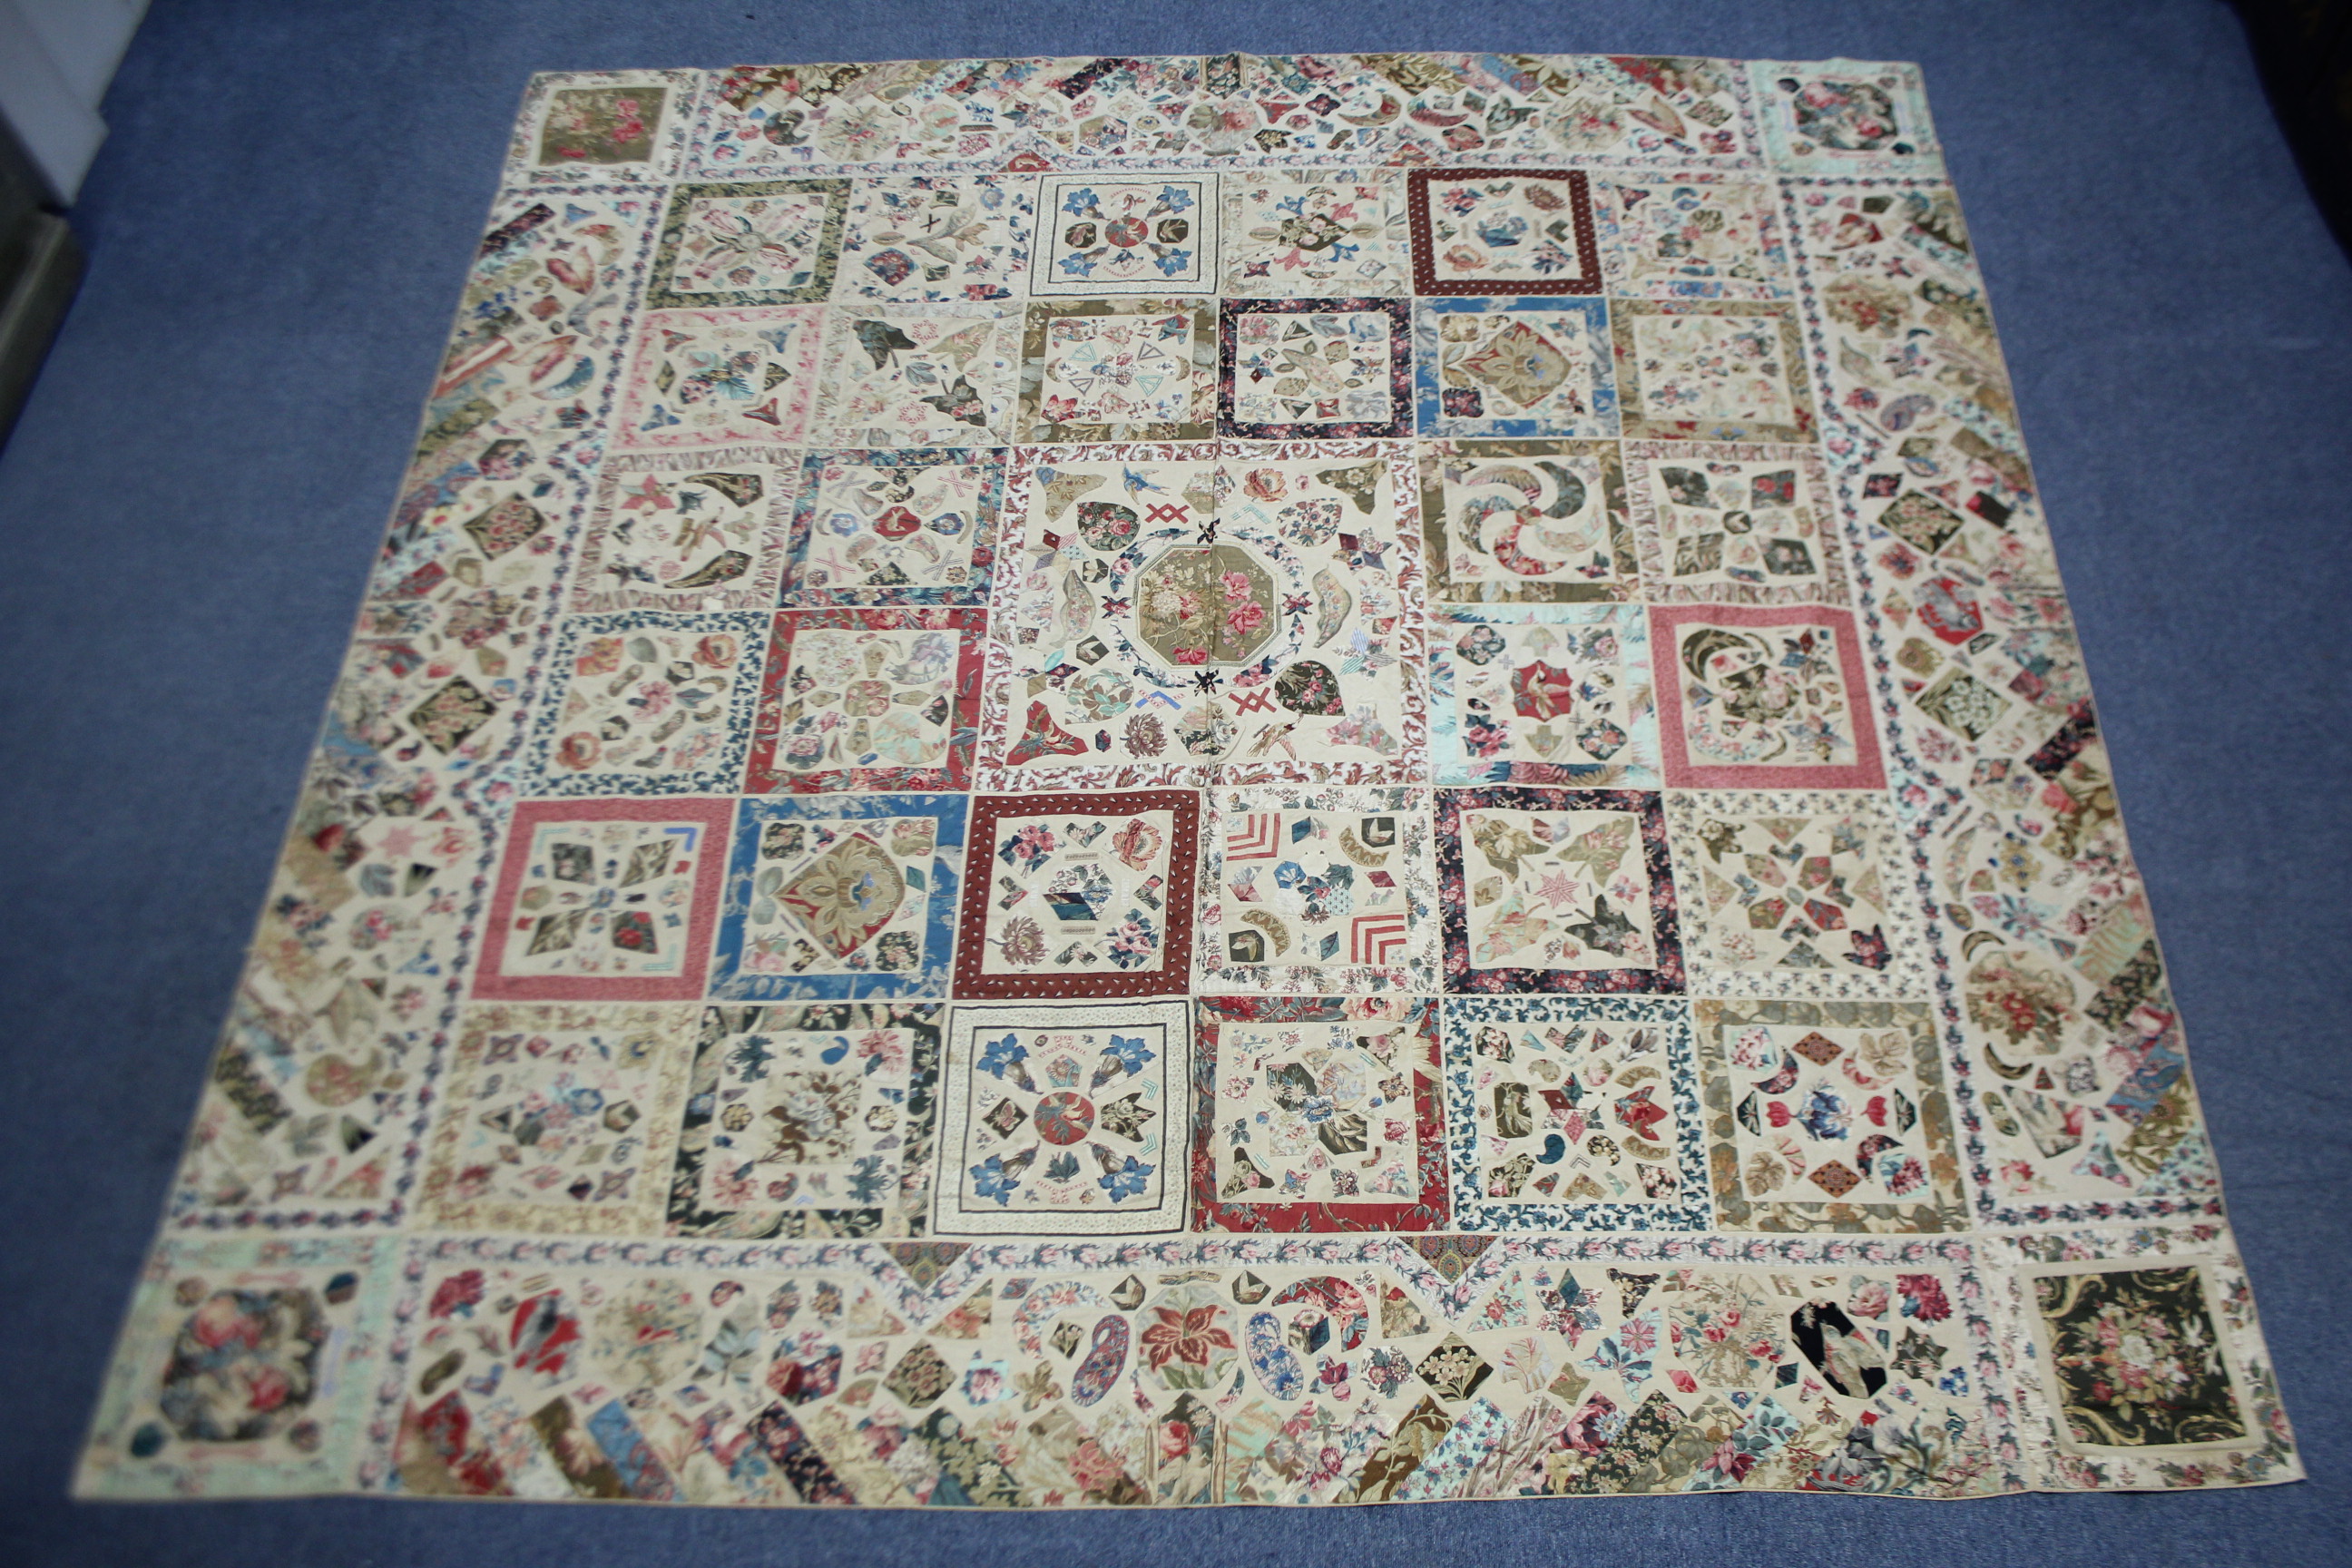 A VICTORIAN PATCHWORK BEDSPREAD or WALL HANGING comprising a wide variety of printed fabrics cut - Image 2 of 5